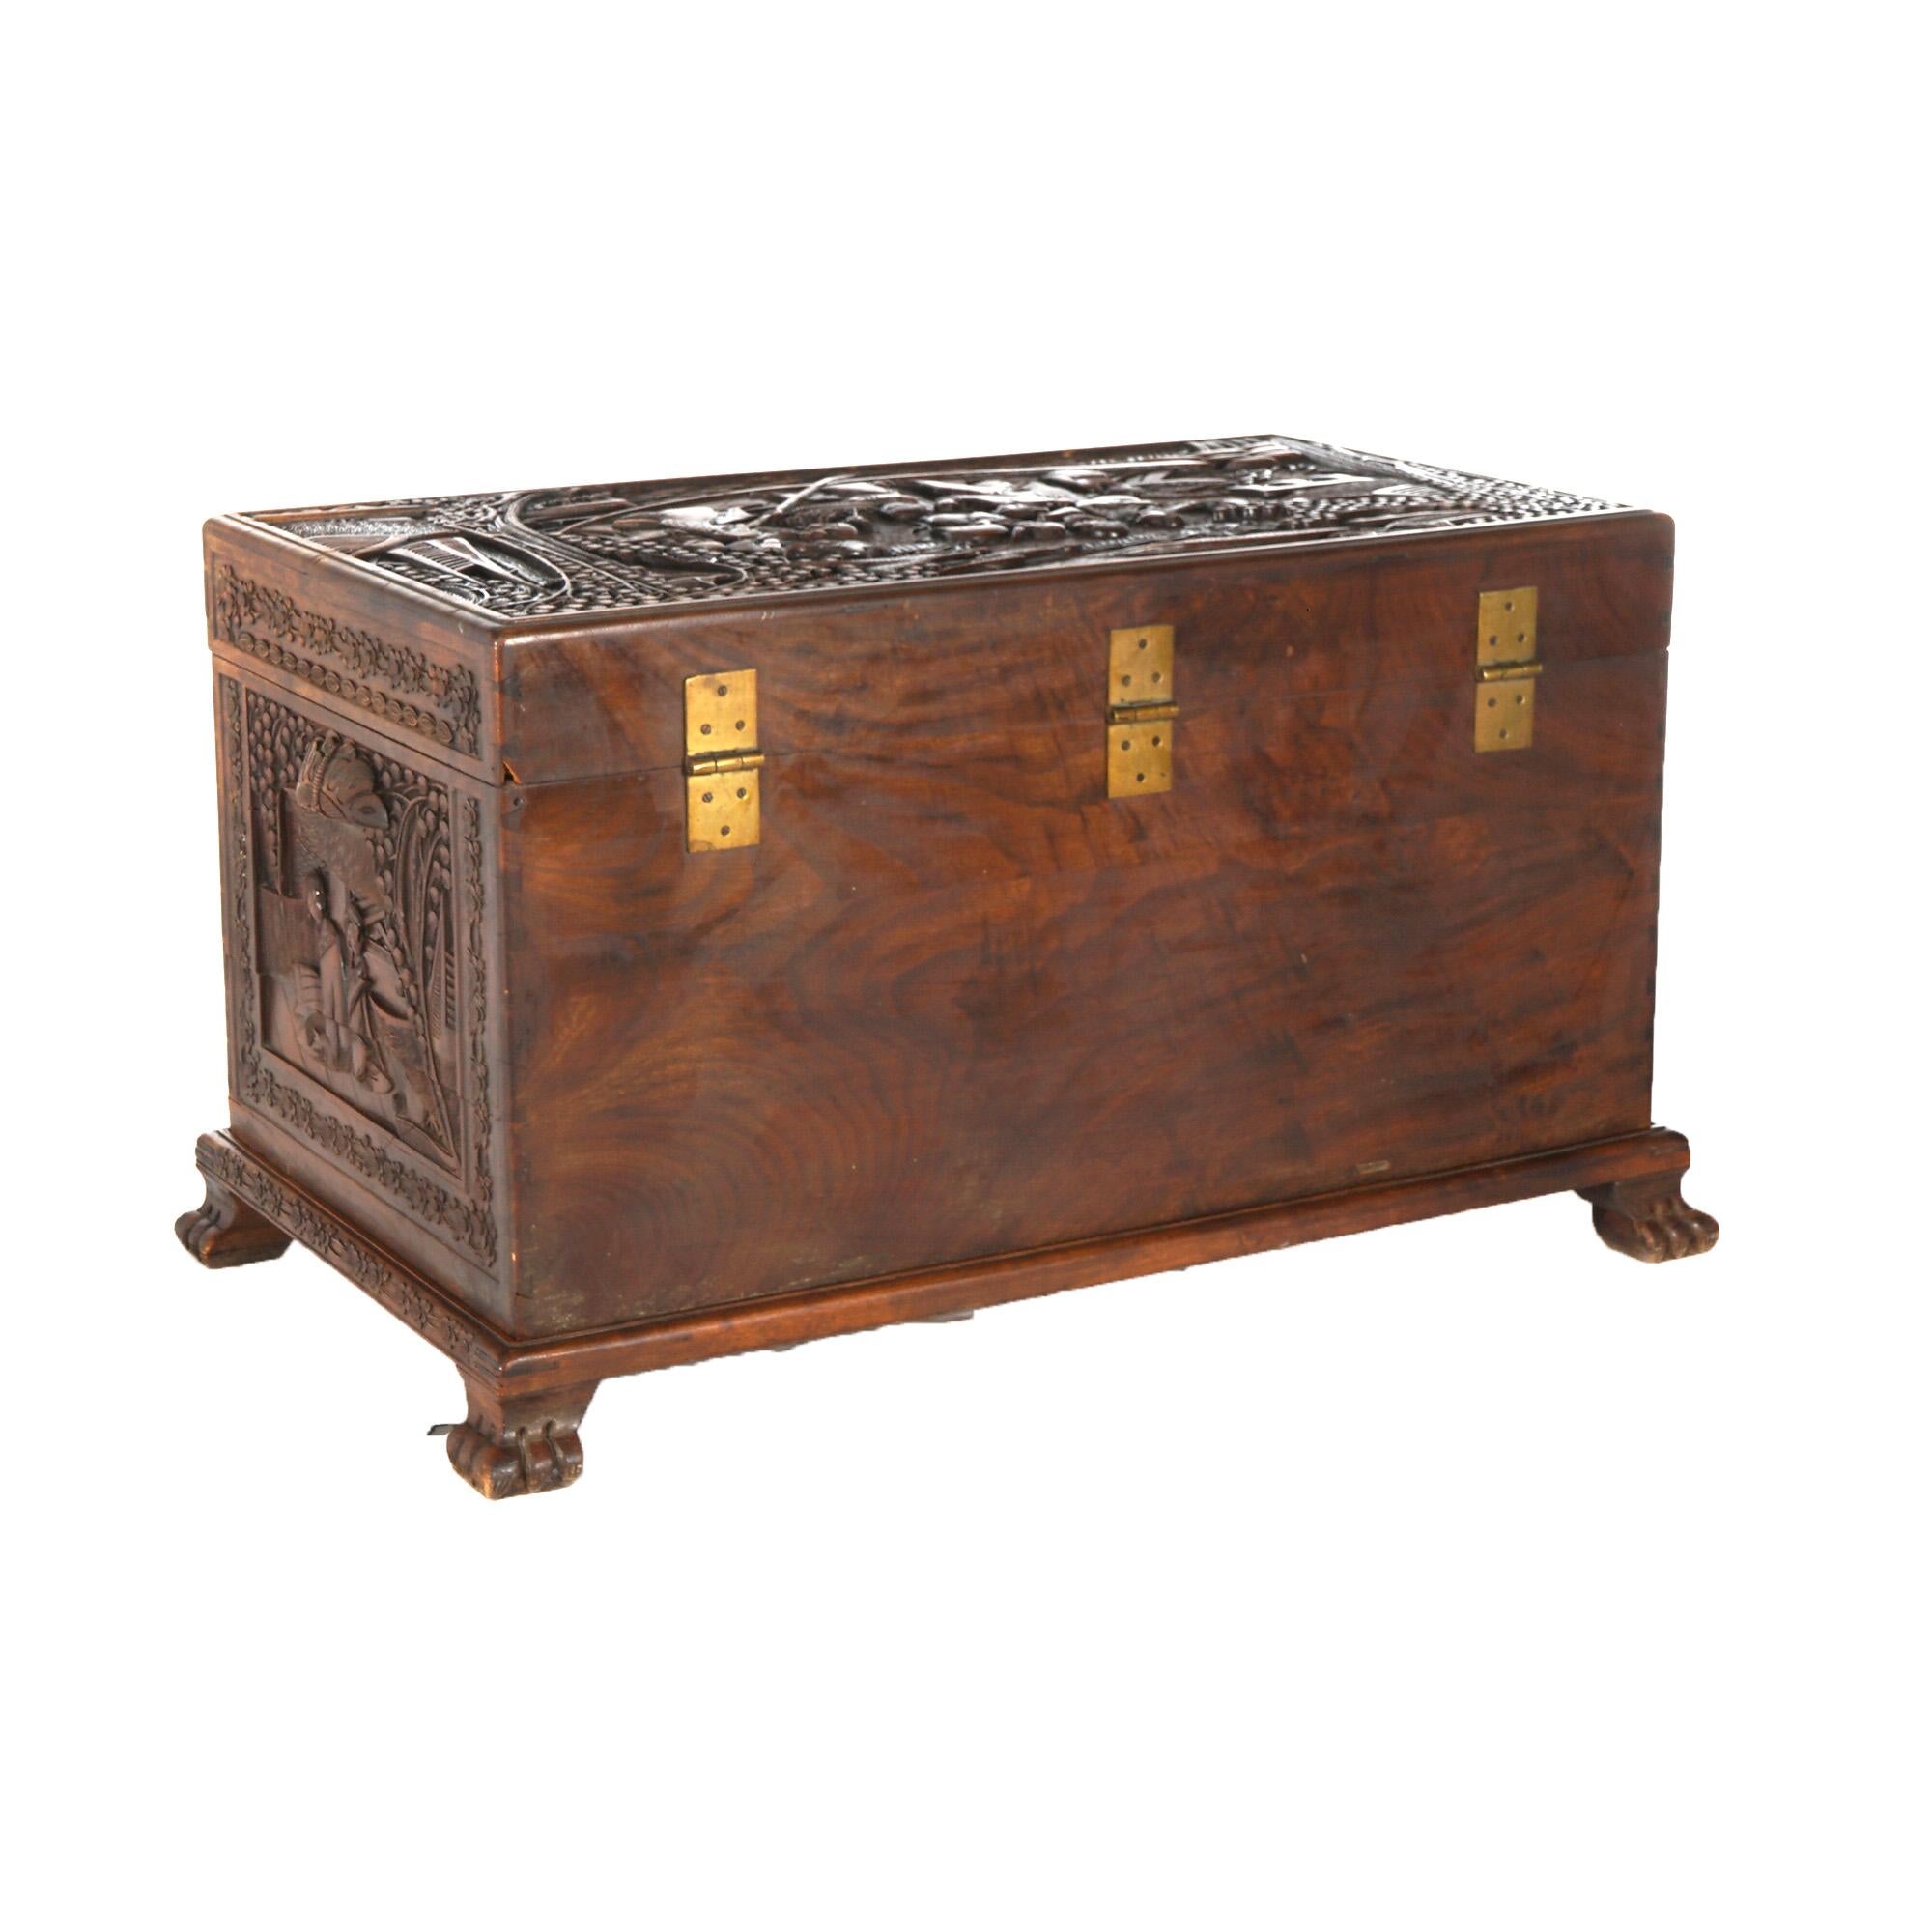 Antique Chinese Hardwood Carved in Relief Chinoiserie Blanket Chest Chest C1920 For Sale 3